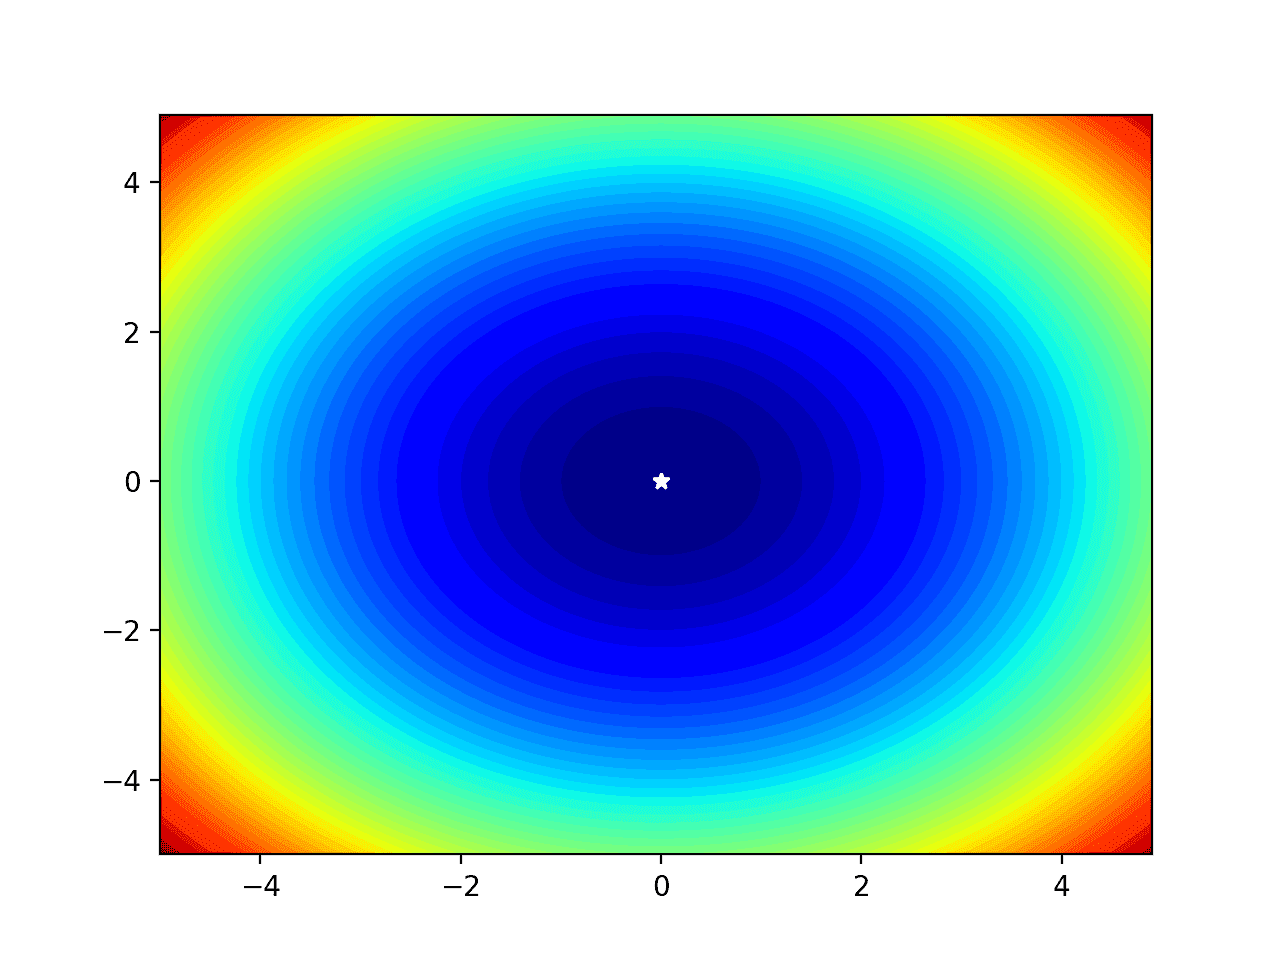 Filled Contour Plot of a Two-Dimensional Objective Function With Optima Marked by a White Star